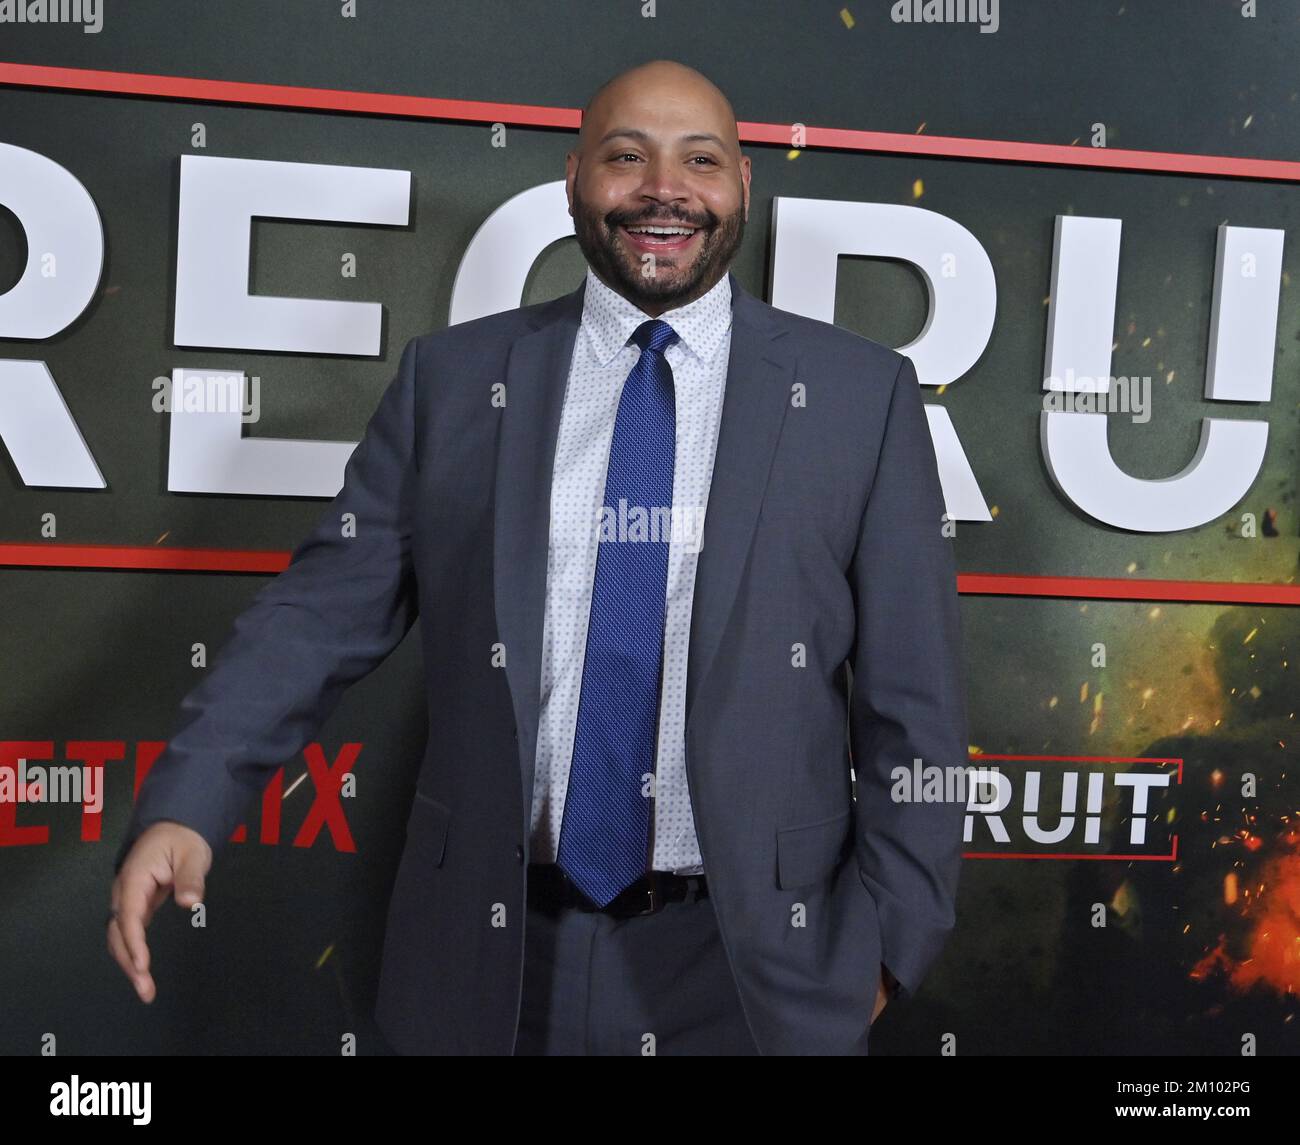 Meet Colton Dunn, latest Twin Cities improv veteran to find TV